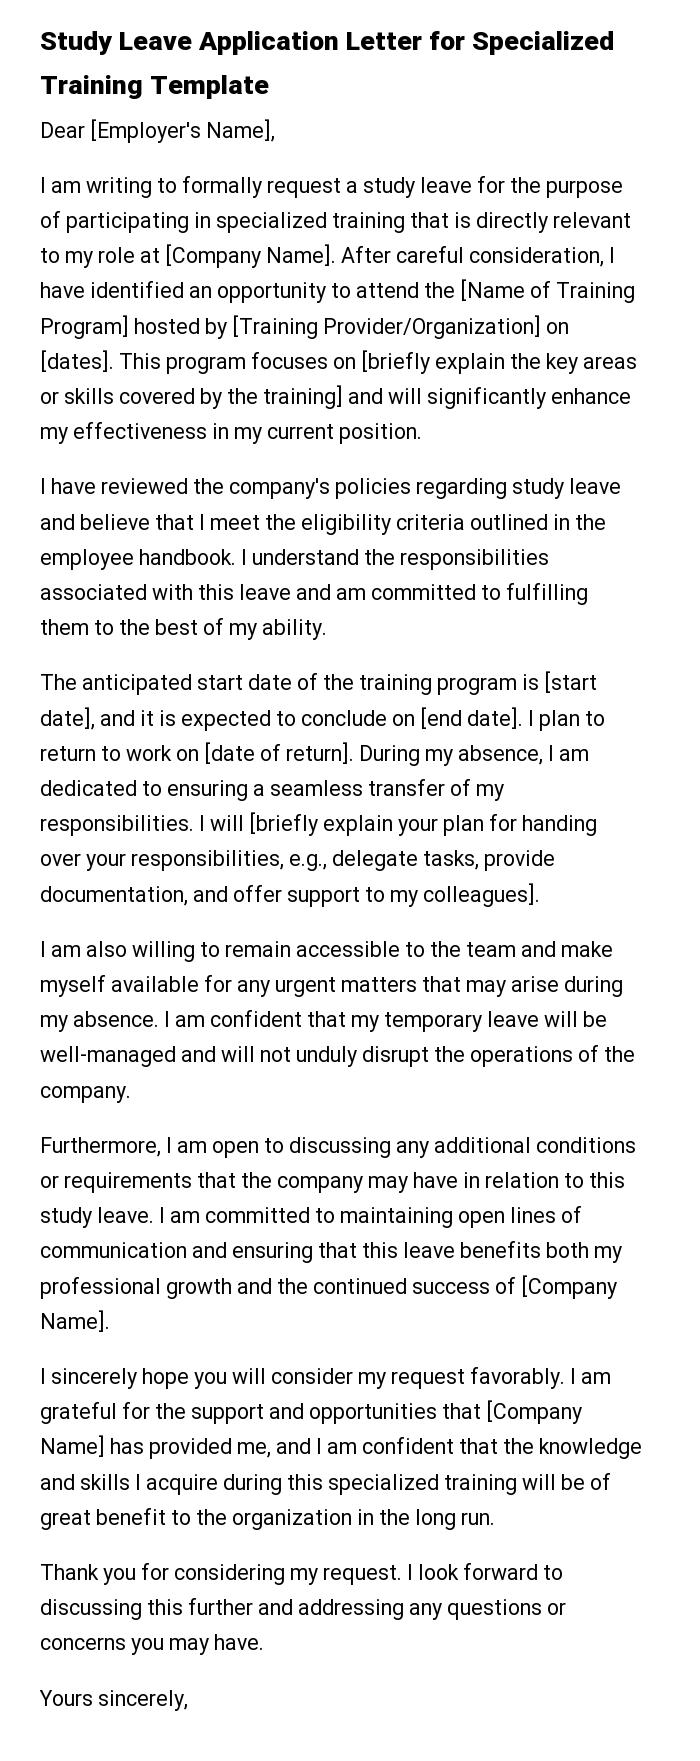 Study Leave Application Letter for Specialized Training Template